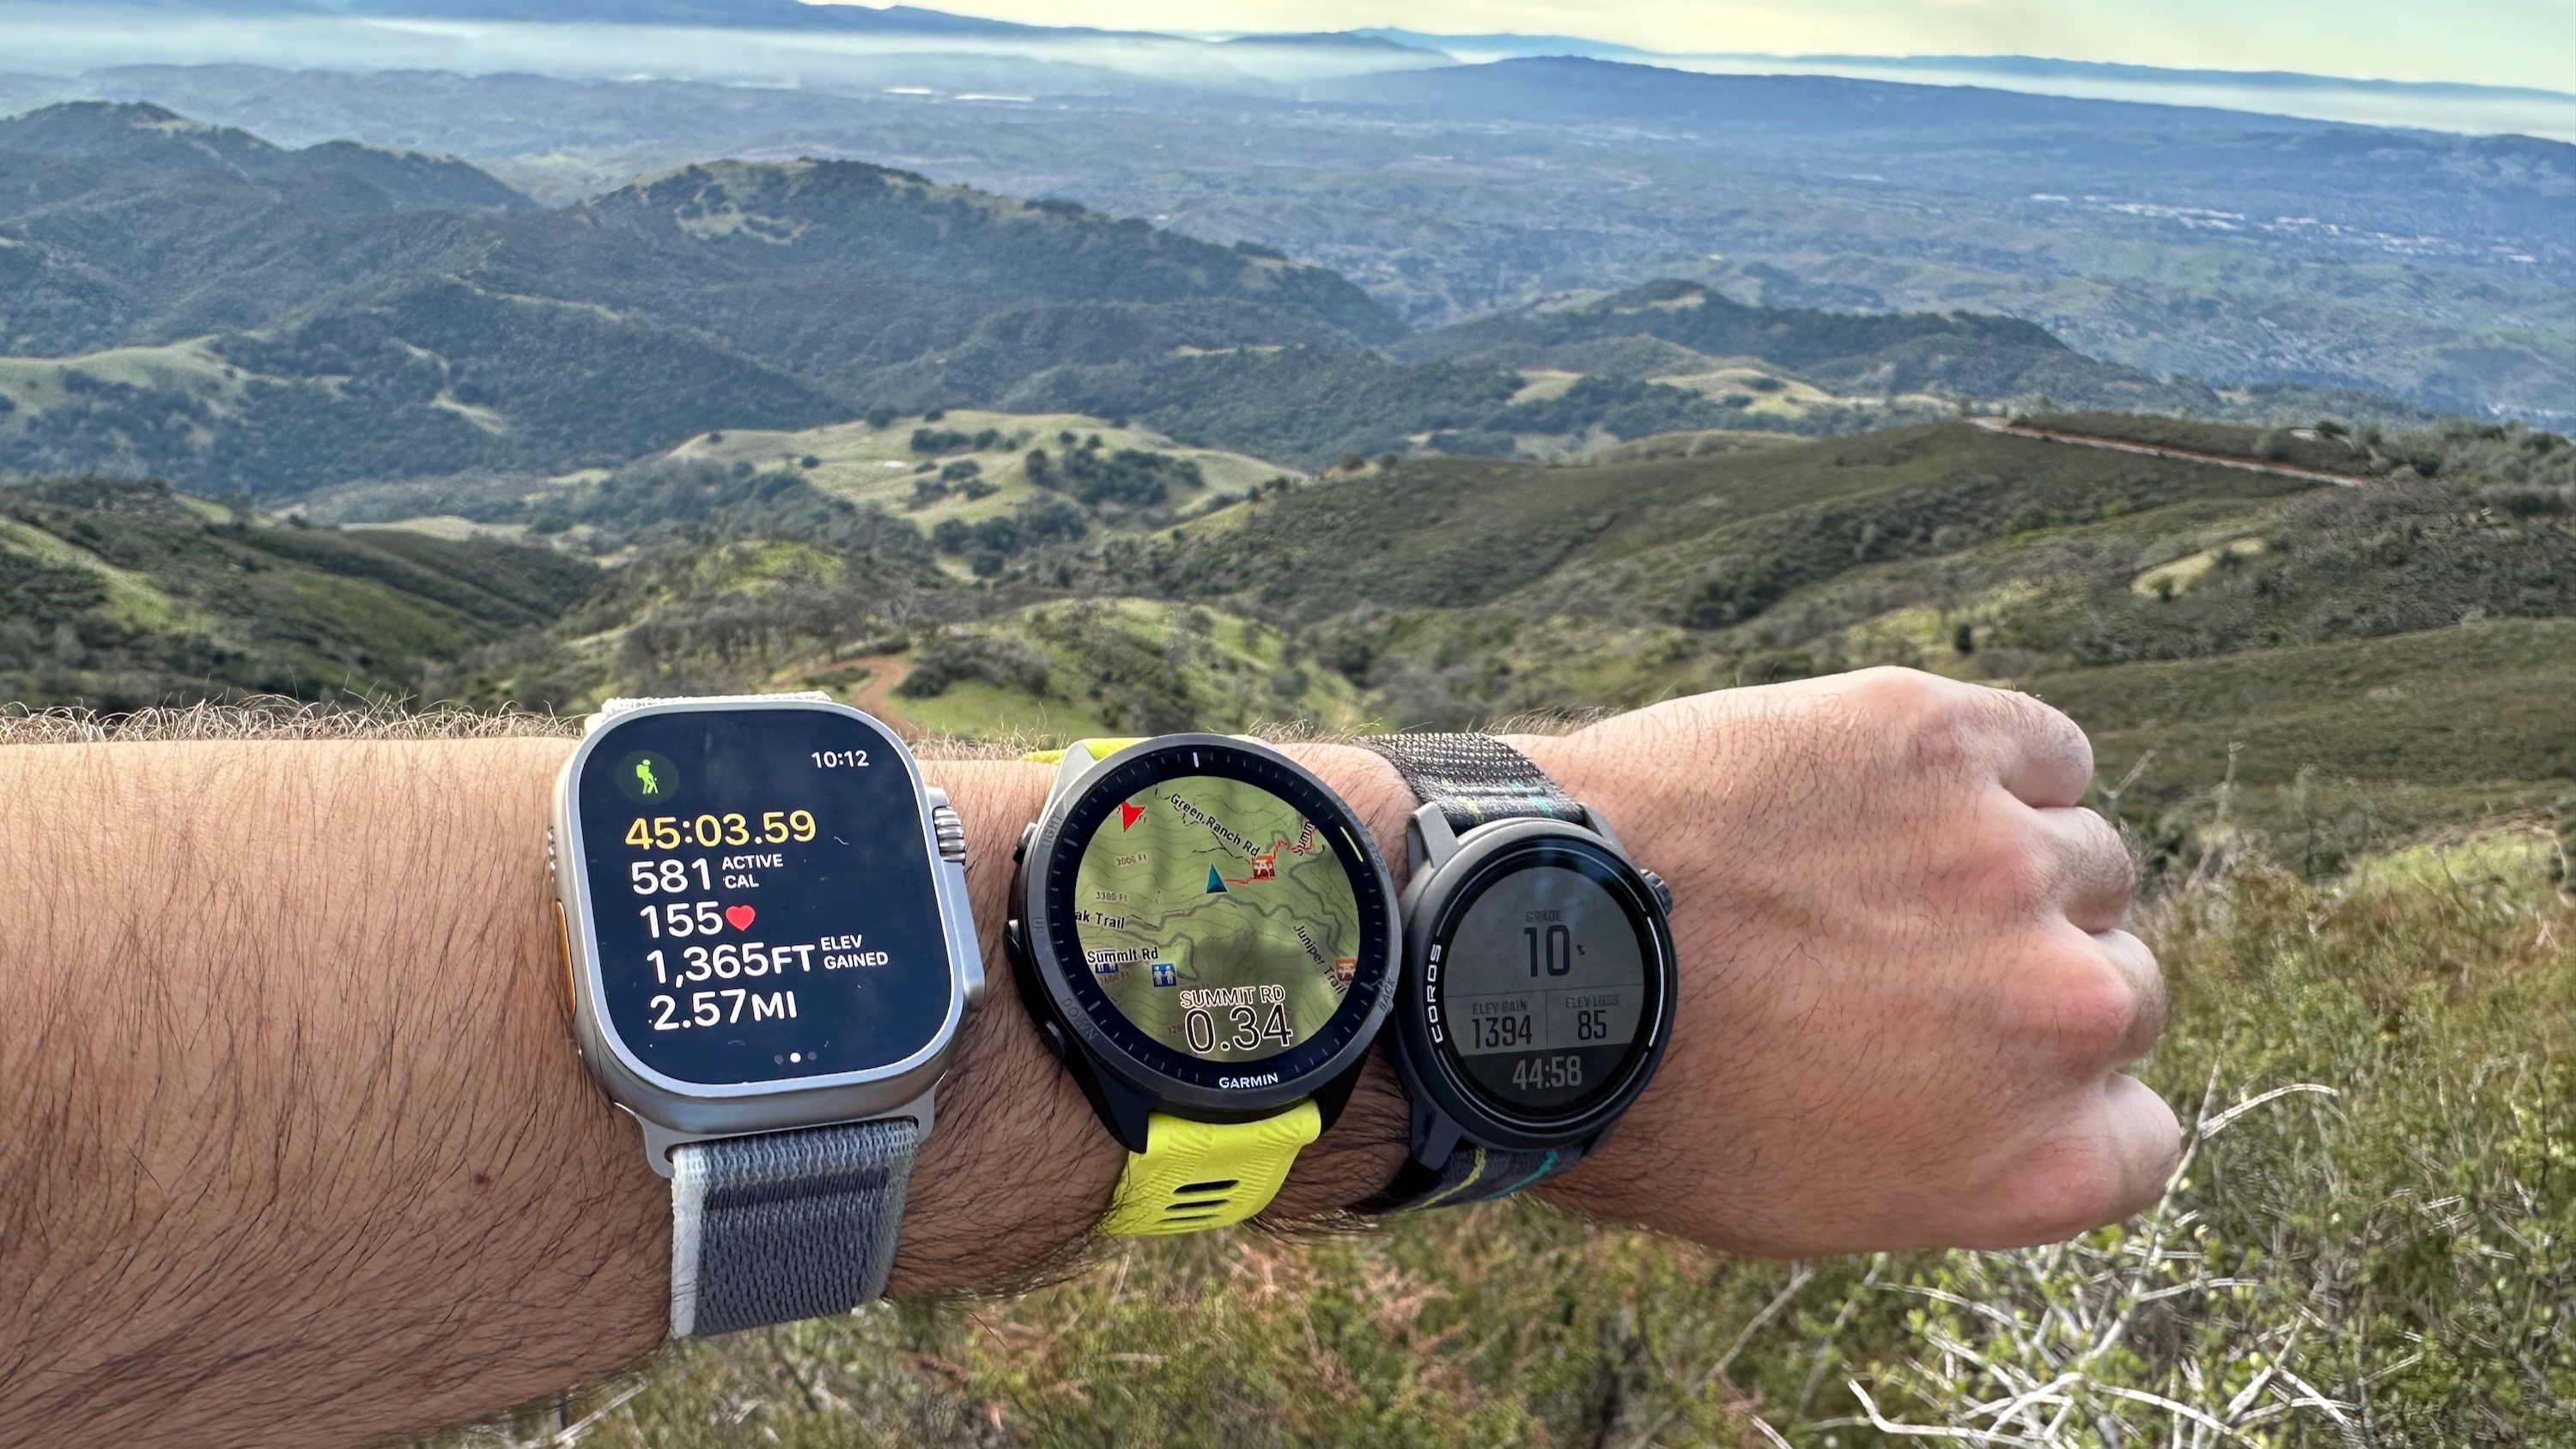 The Apple Watch Ultra 2, Garmin Forerunner 965, and COROS PACE 3 are all worn on one wrist on the Mount Diablo Summit Trail, overlooking the valley below.